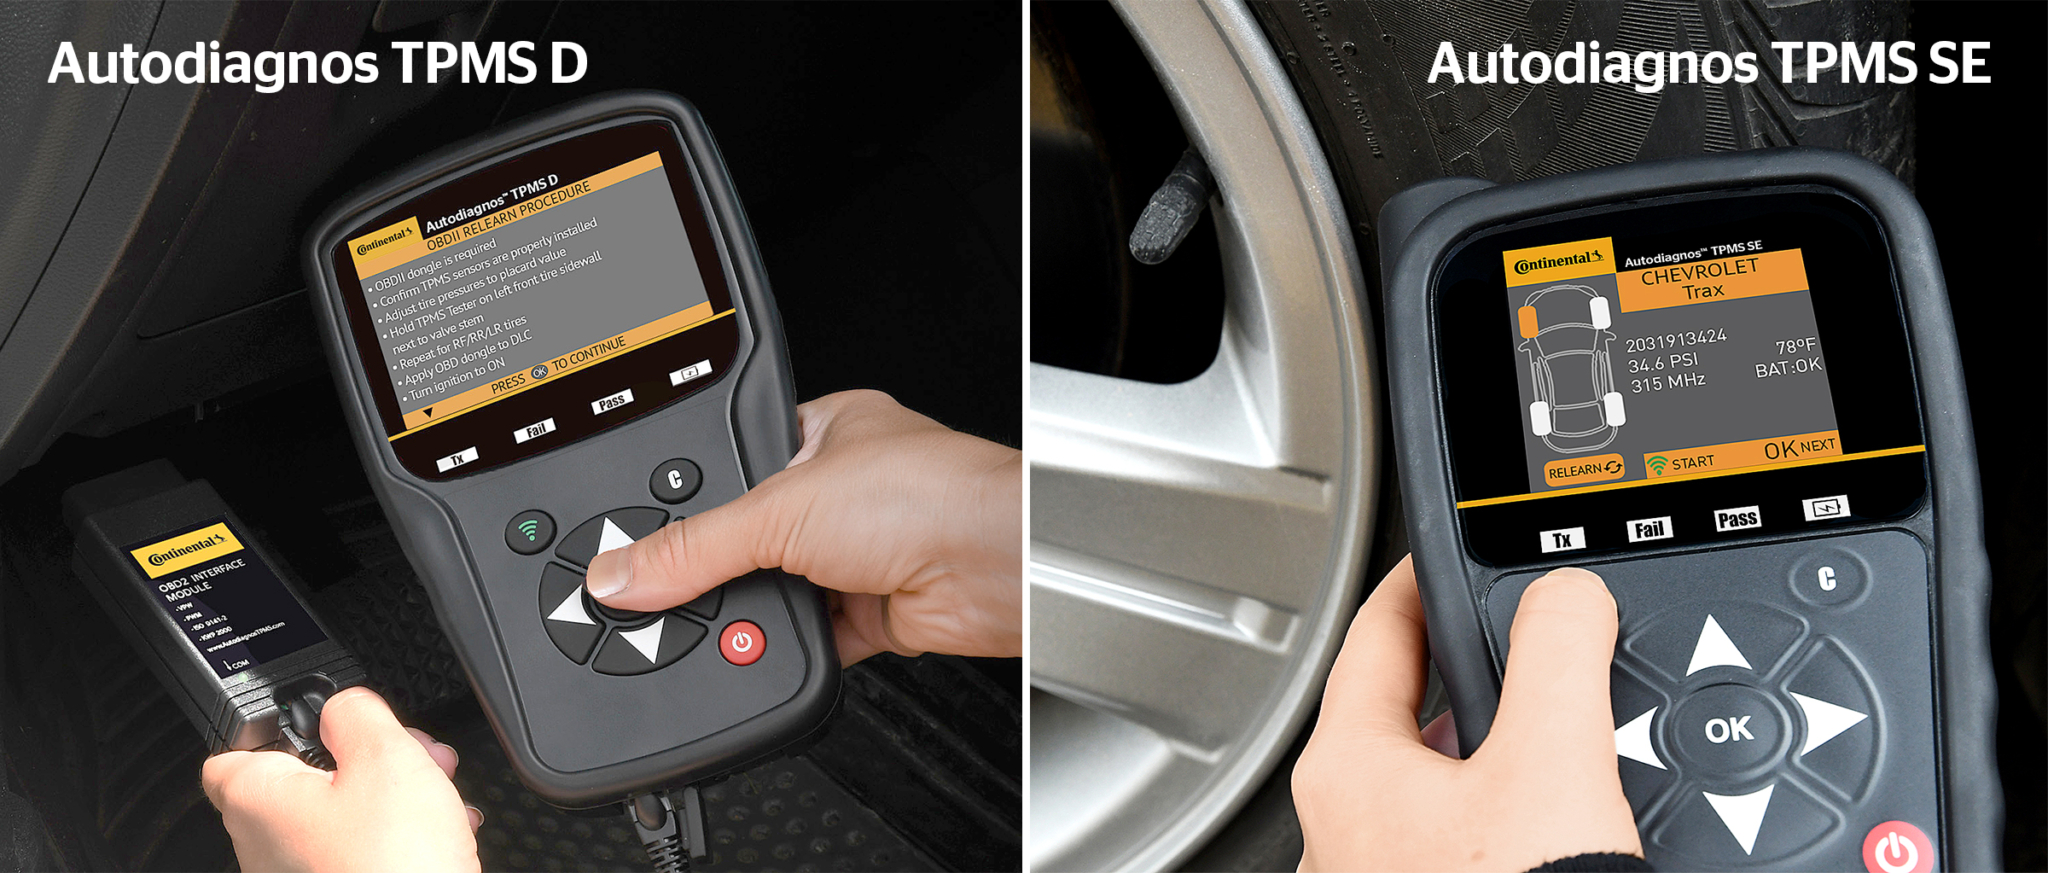 Two new TPMS tools also launched by Conti in the US